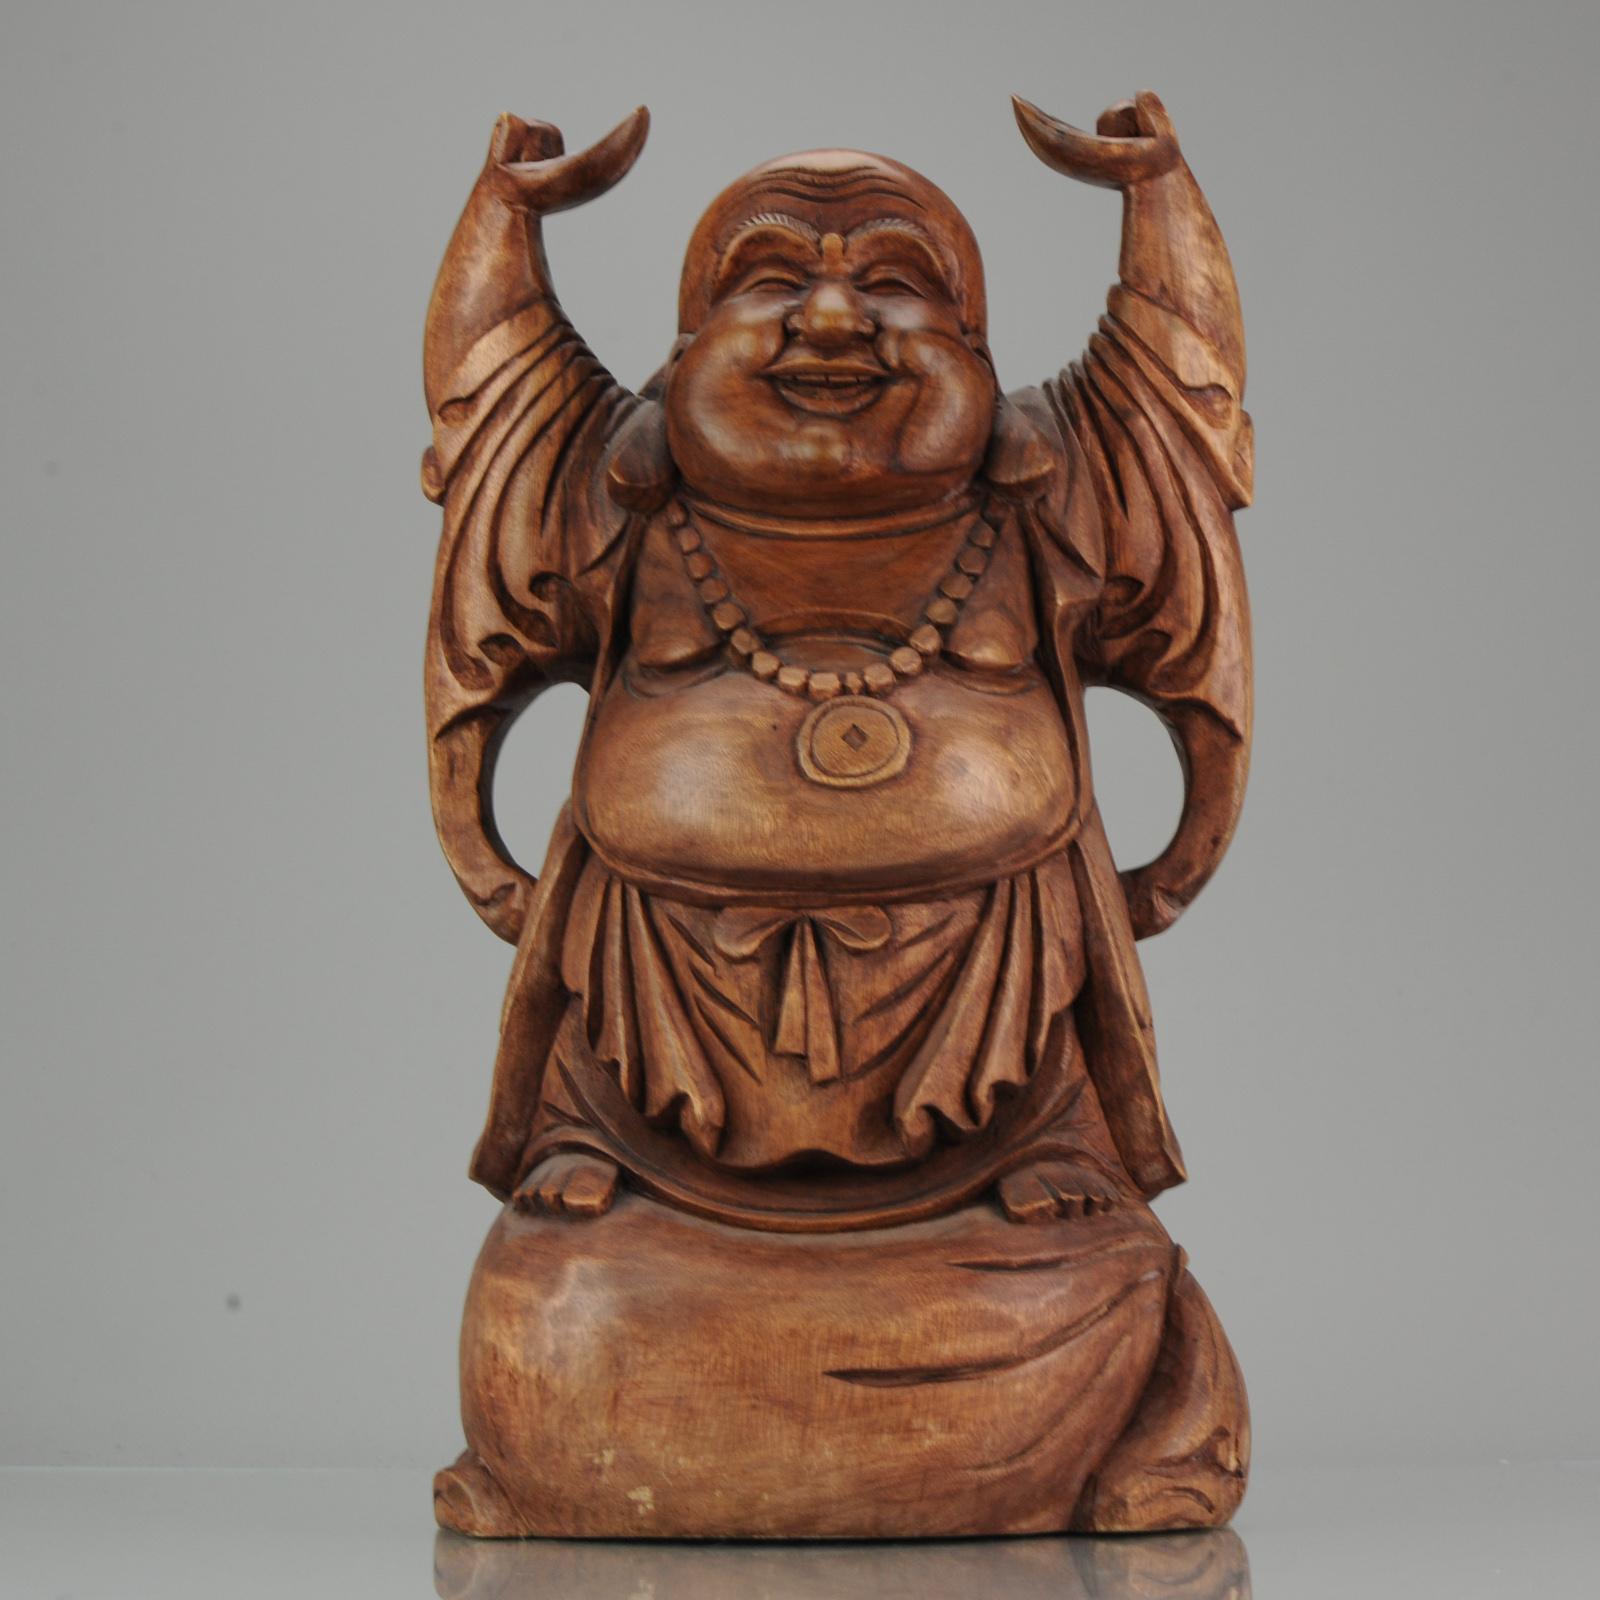 Huge and beautifully carved statue of a Laughing Buddha. Nice artifact as home decoration.

Condition
Damage to 1 of the hands, part eye seems restuck (nicely done) and 1 frit/chip and 1 crack. Measures: 500 x 280 x 150mm height x diameter x